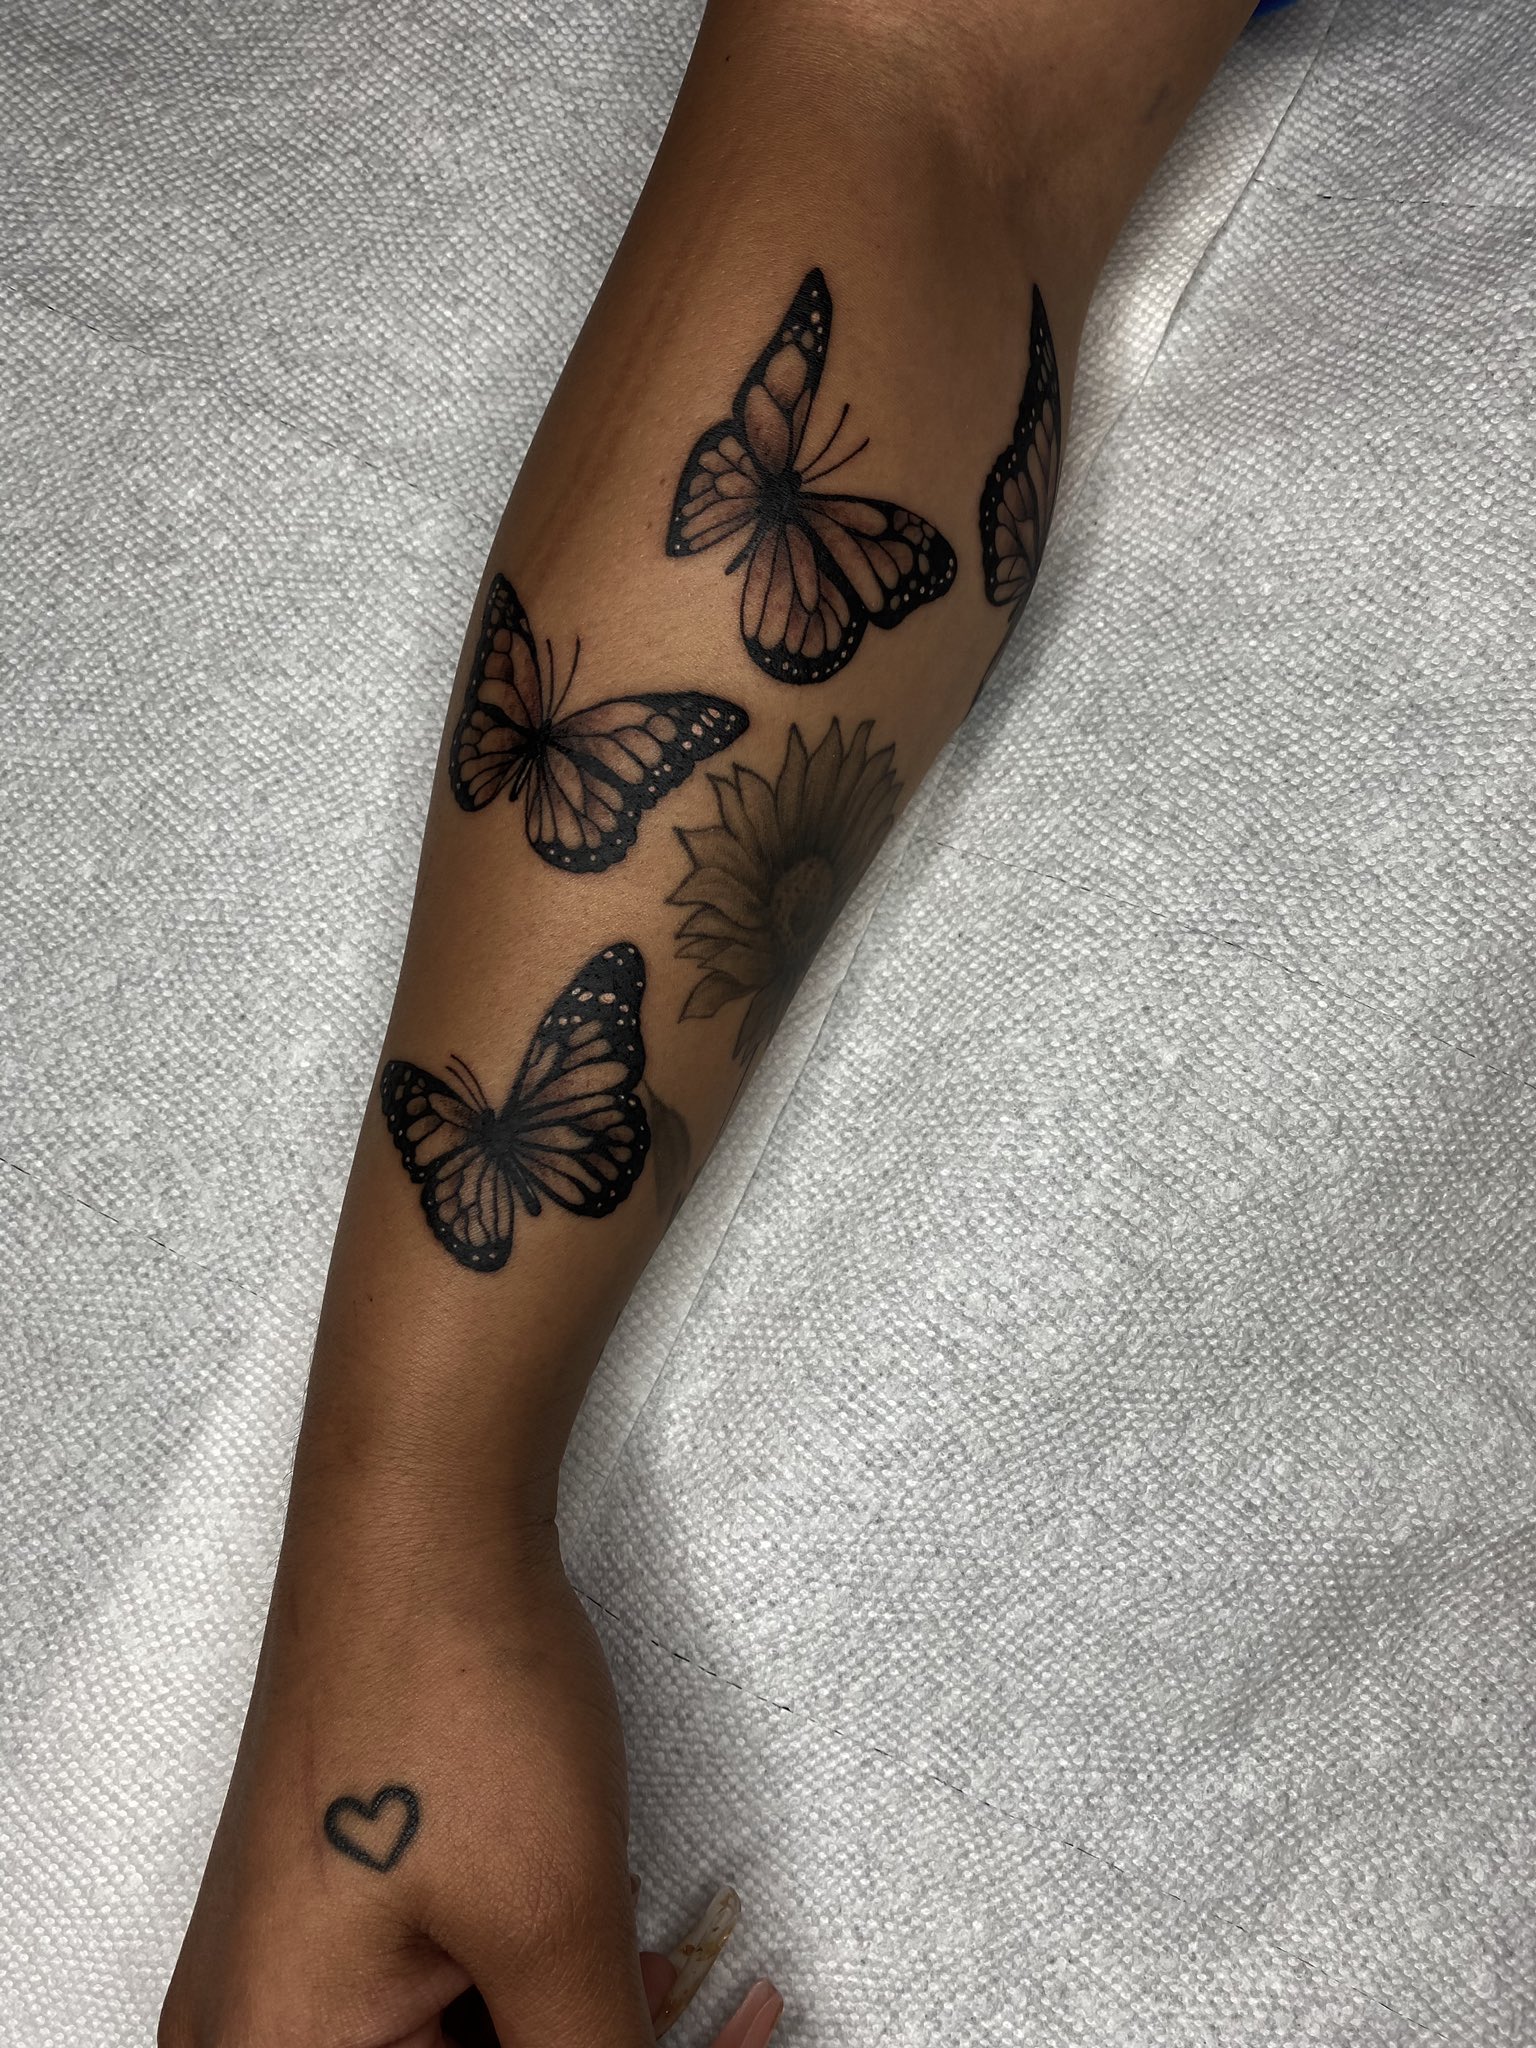 10 Best Black Butterfly Tattoo Ideas Youll Have To See To Believe 